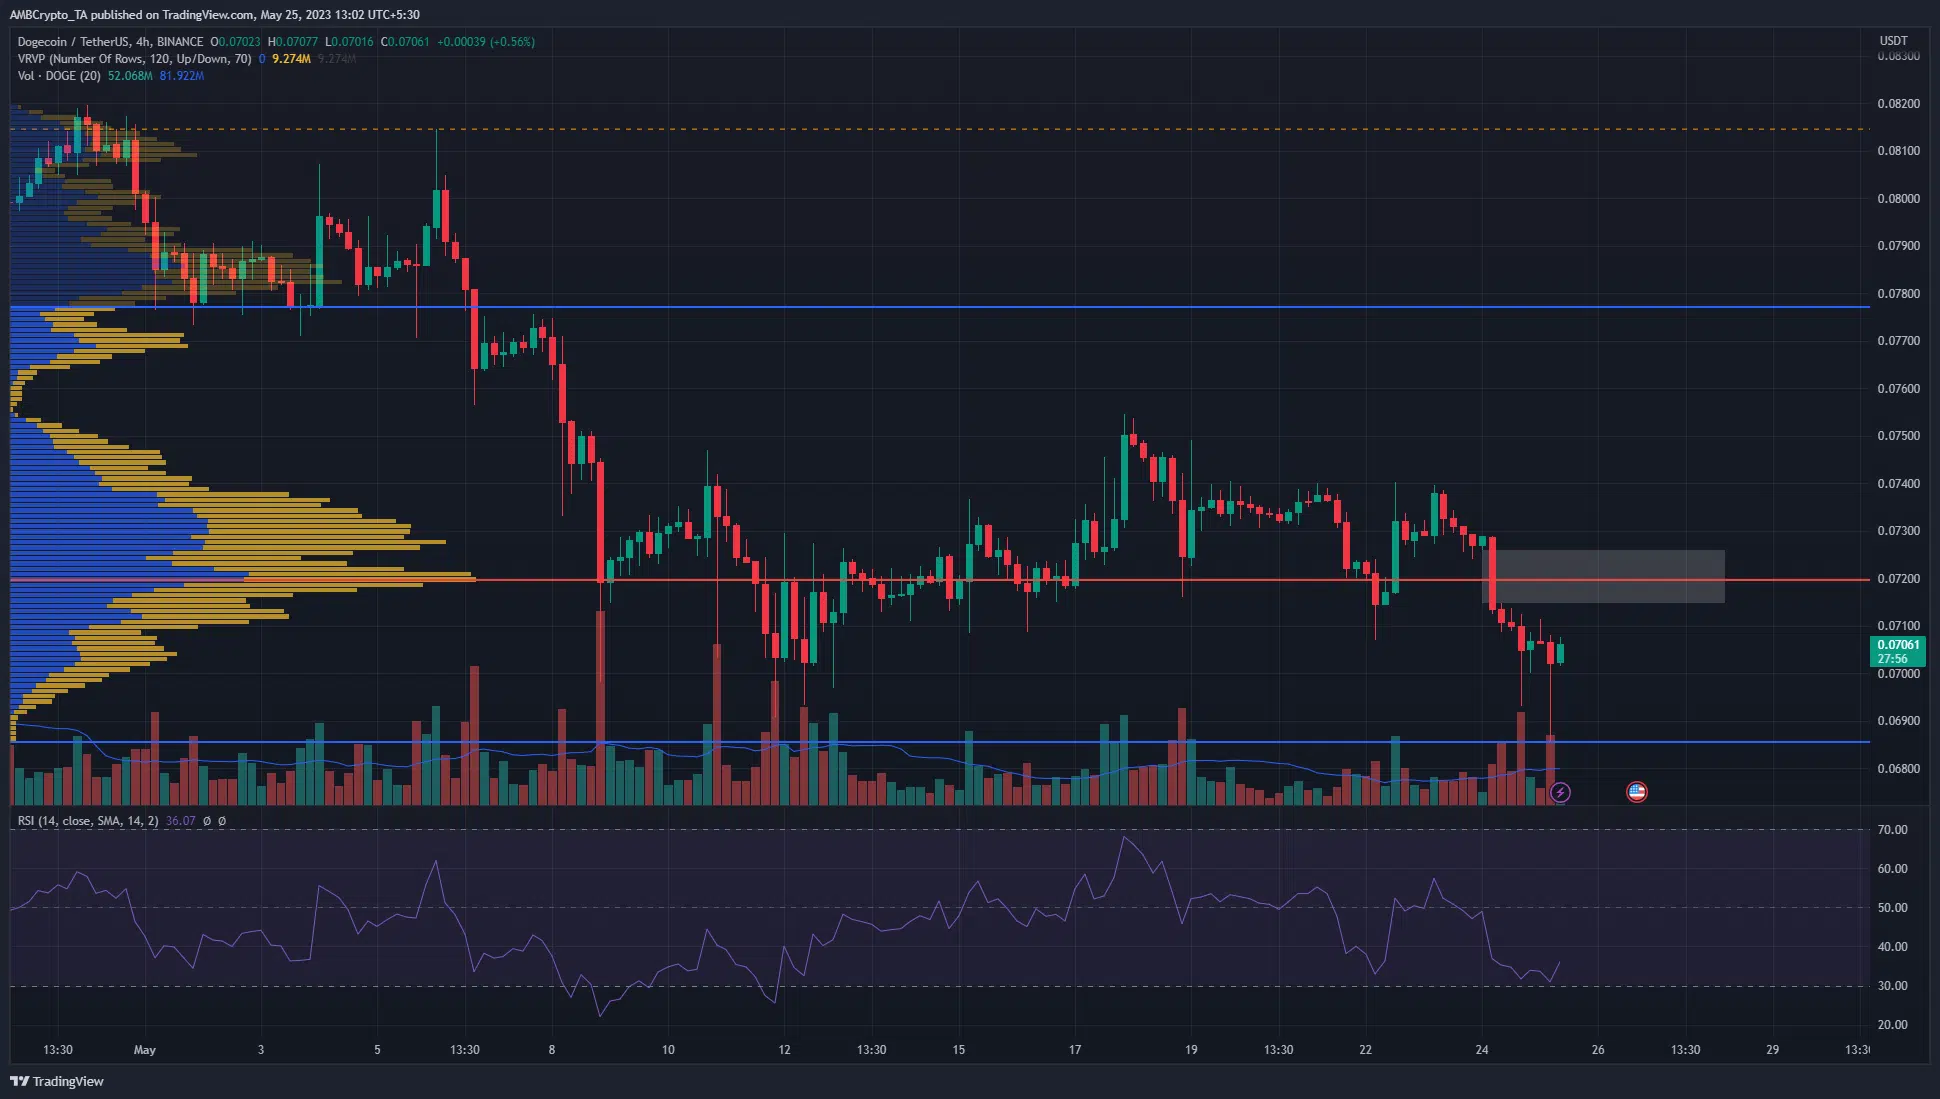 Dogecoin falls below critical short-terms support level, further losses expected